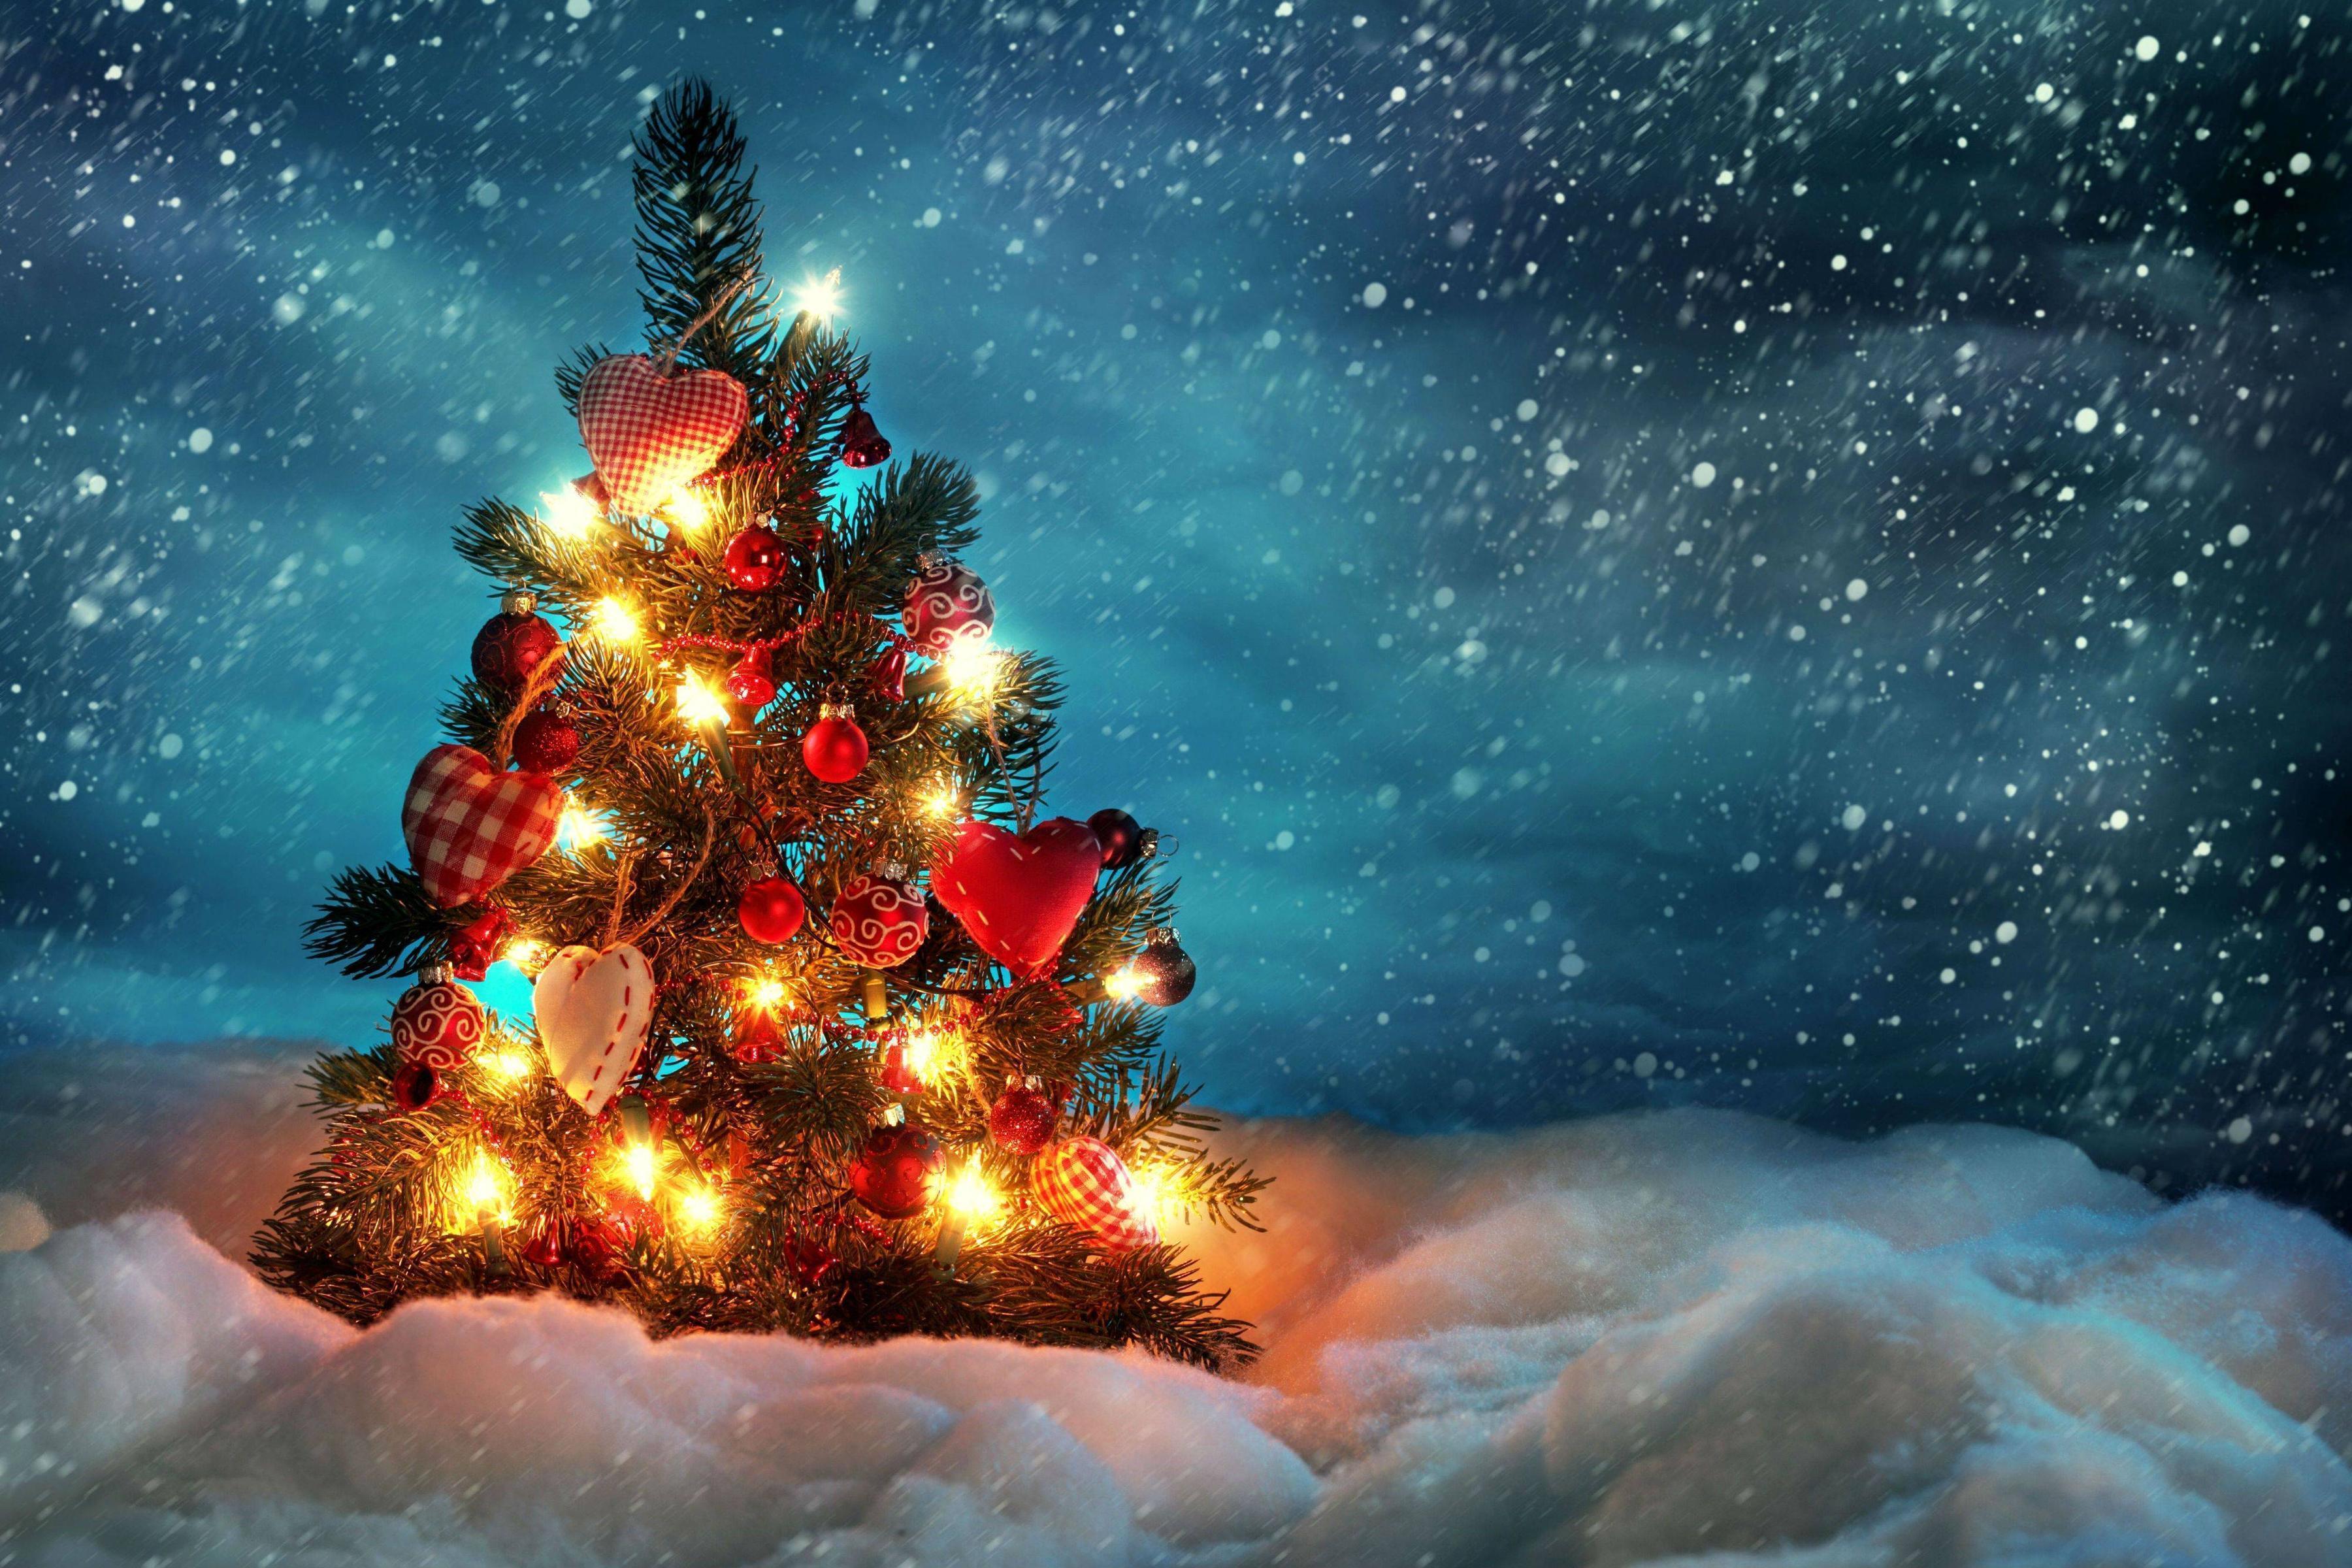 Holiday Christmas Tree Wallpaper Backgrounds taken from Christmas